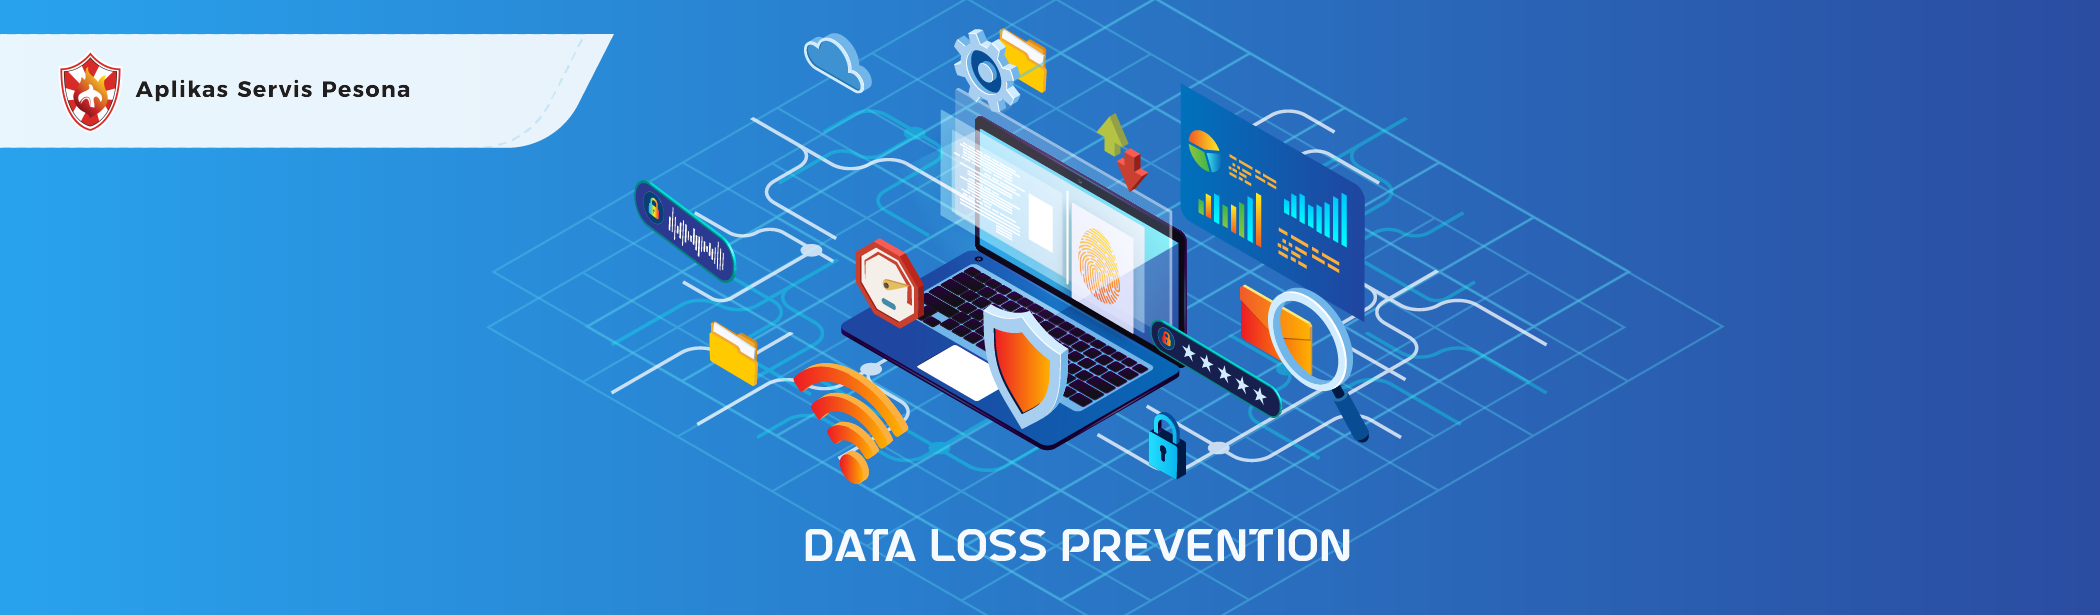 Improving Company’s Data Security with Data Loss Prevention Solutions